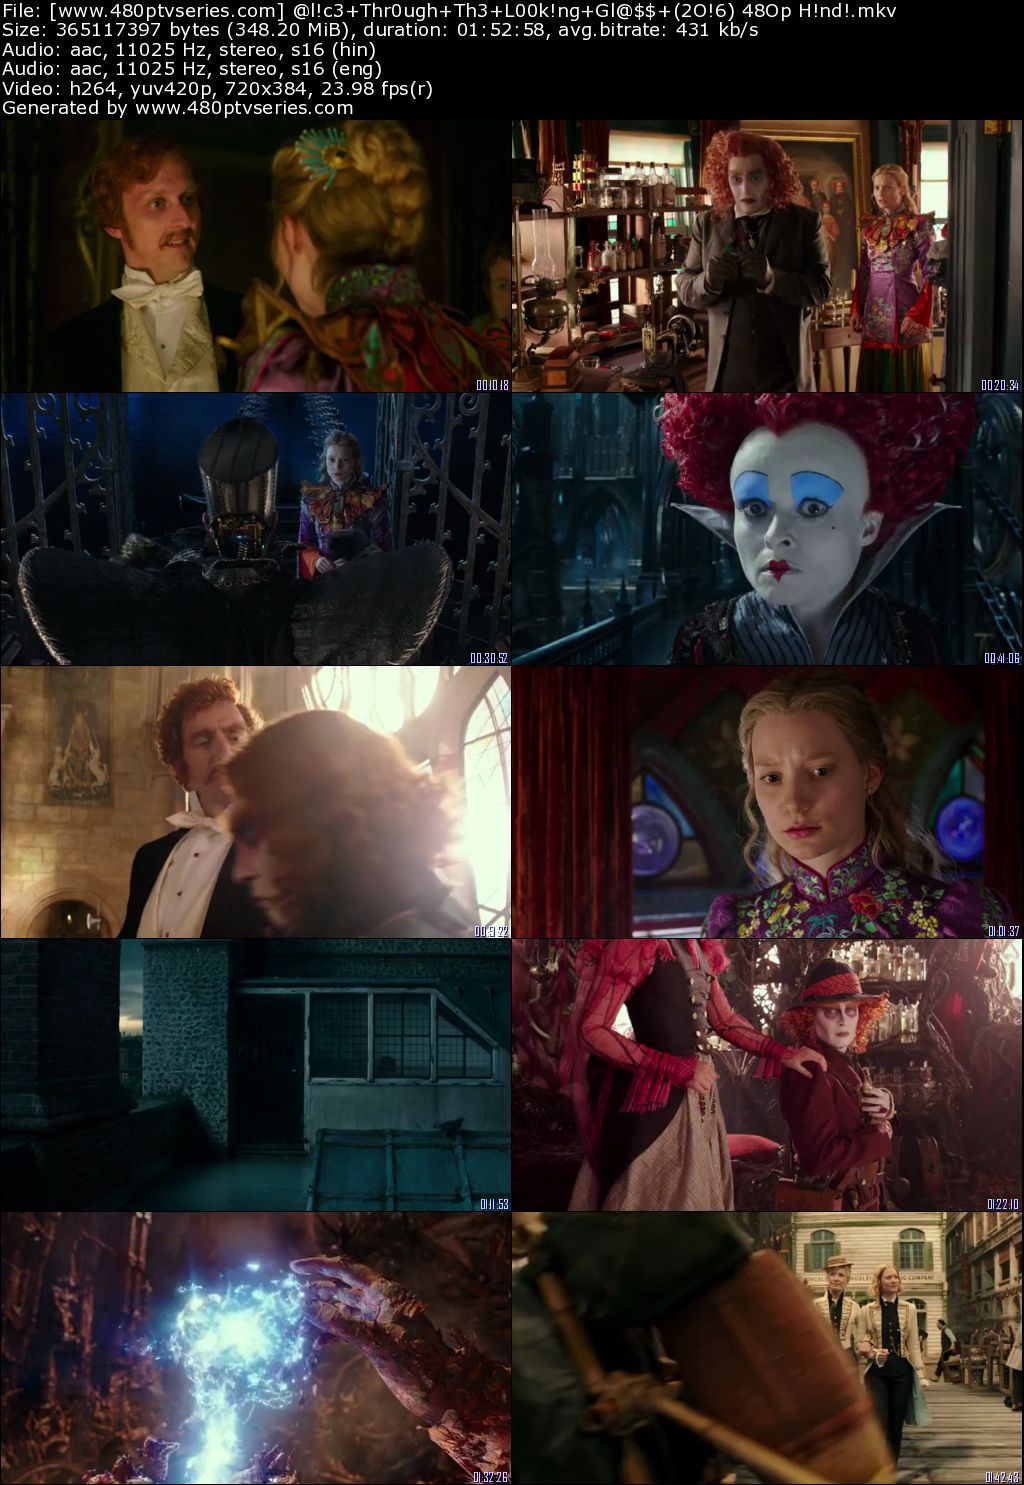 Alice Through the Looking Glass (2016) 350MB Full Hindi Dual Audio Movie Download 480p Bluray Free Watch Online Full Movie Download Worldfree4u 9xmovies